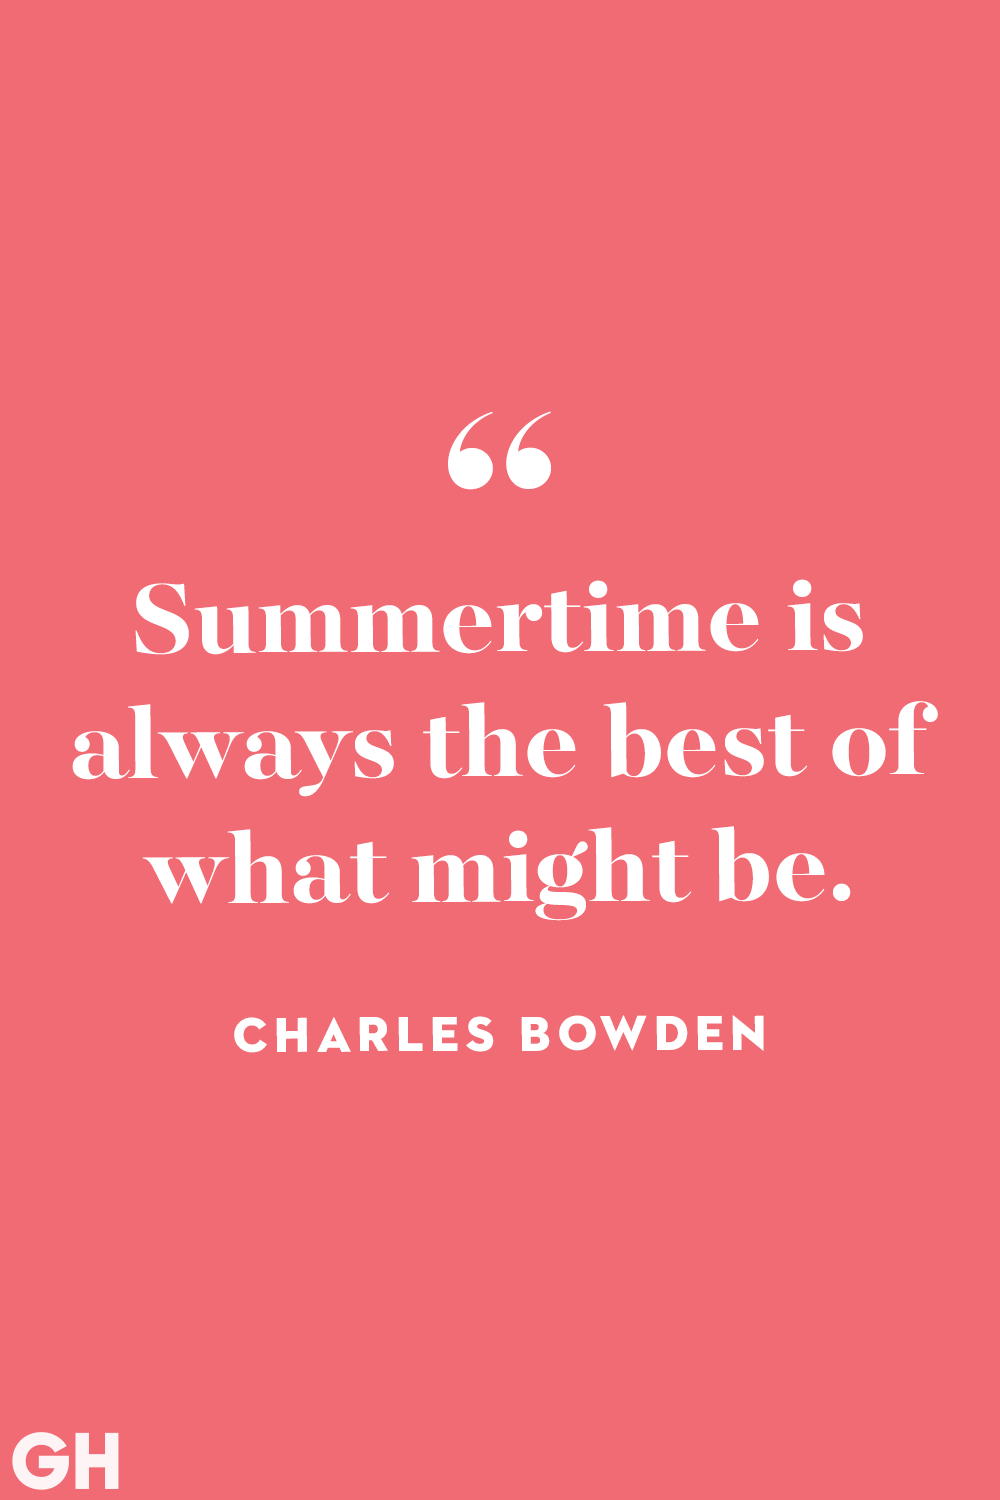 Best Summer Quotes Sayings About Summertime